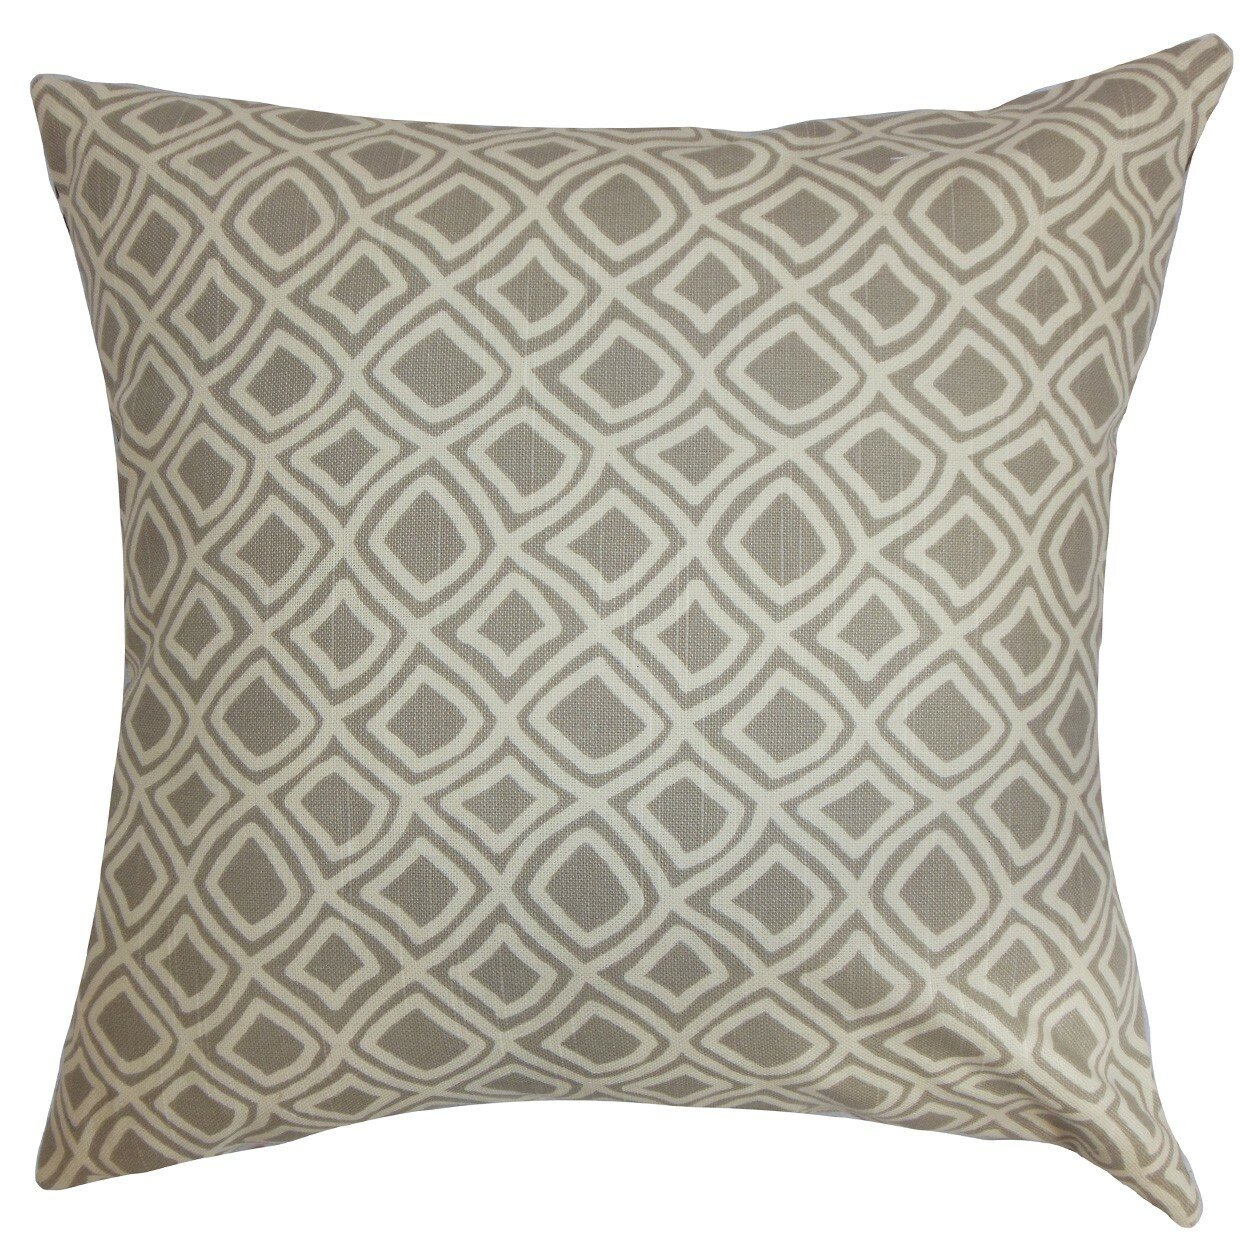 The Pillow Collection Iphigenia Floral Bedding Sham Gray King//20 x 36